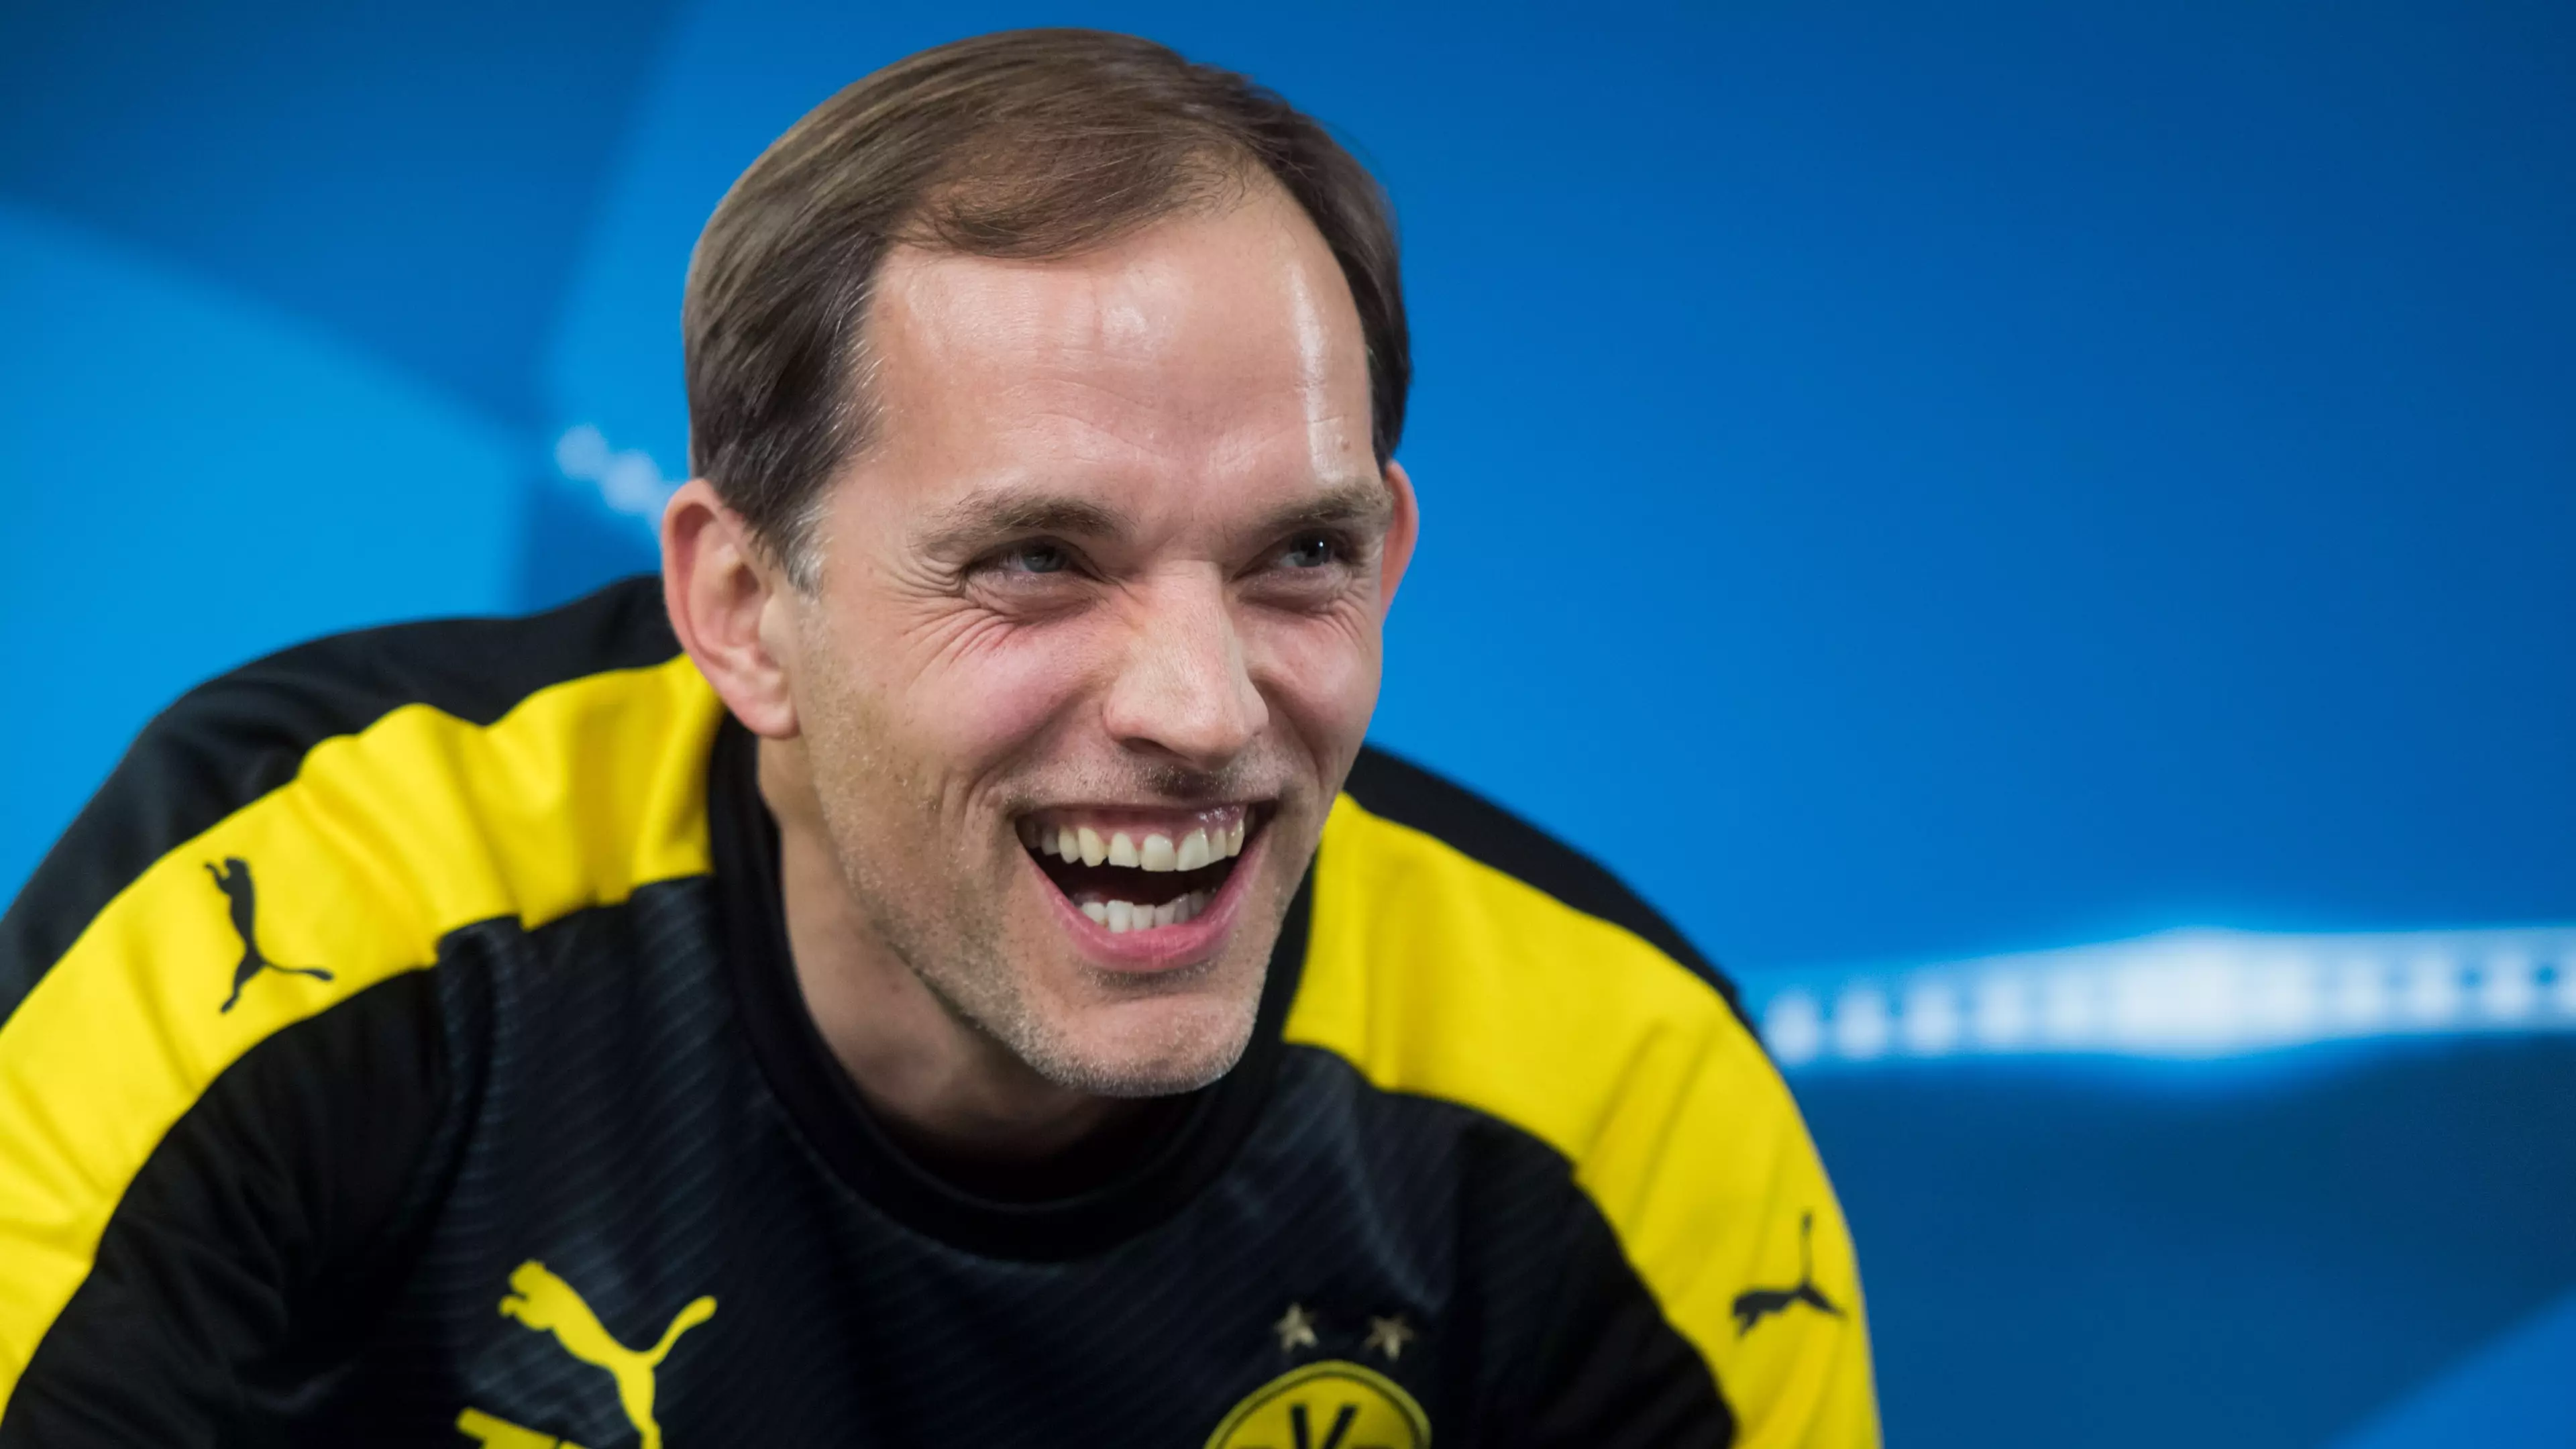 Borussia Dortmund Are Unbeaten At Home In The League In 734 Days